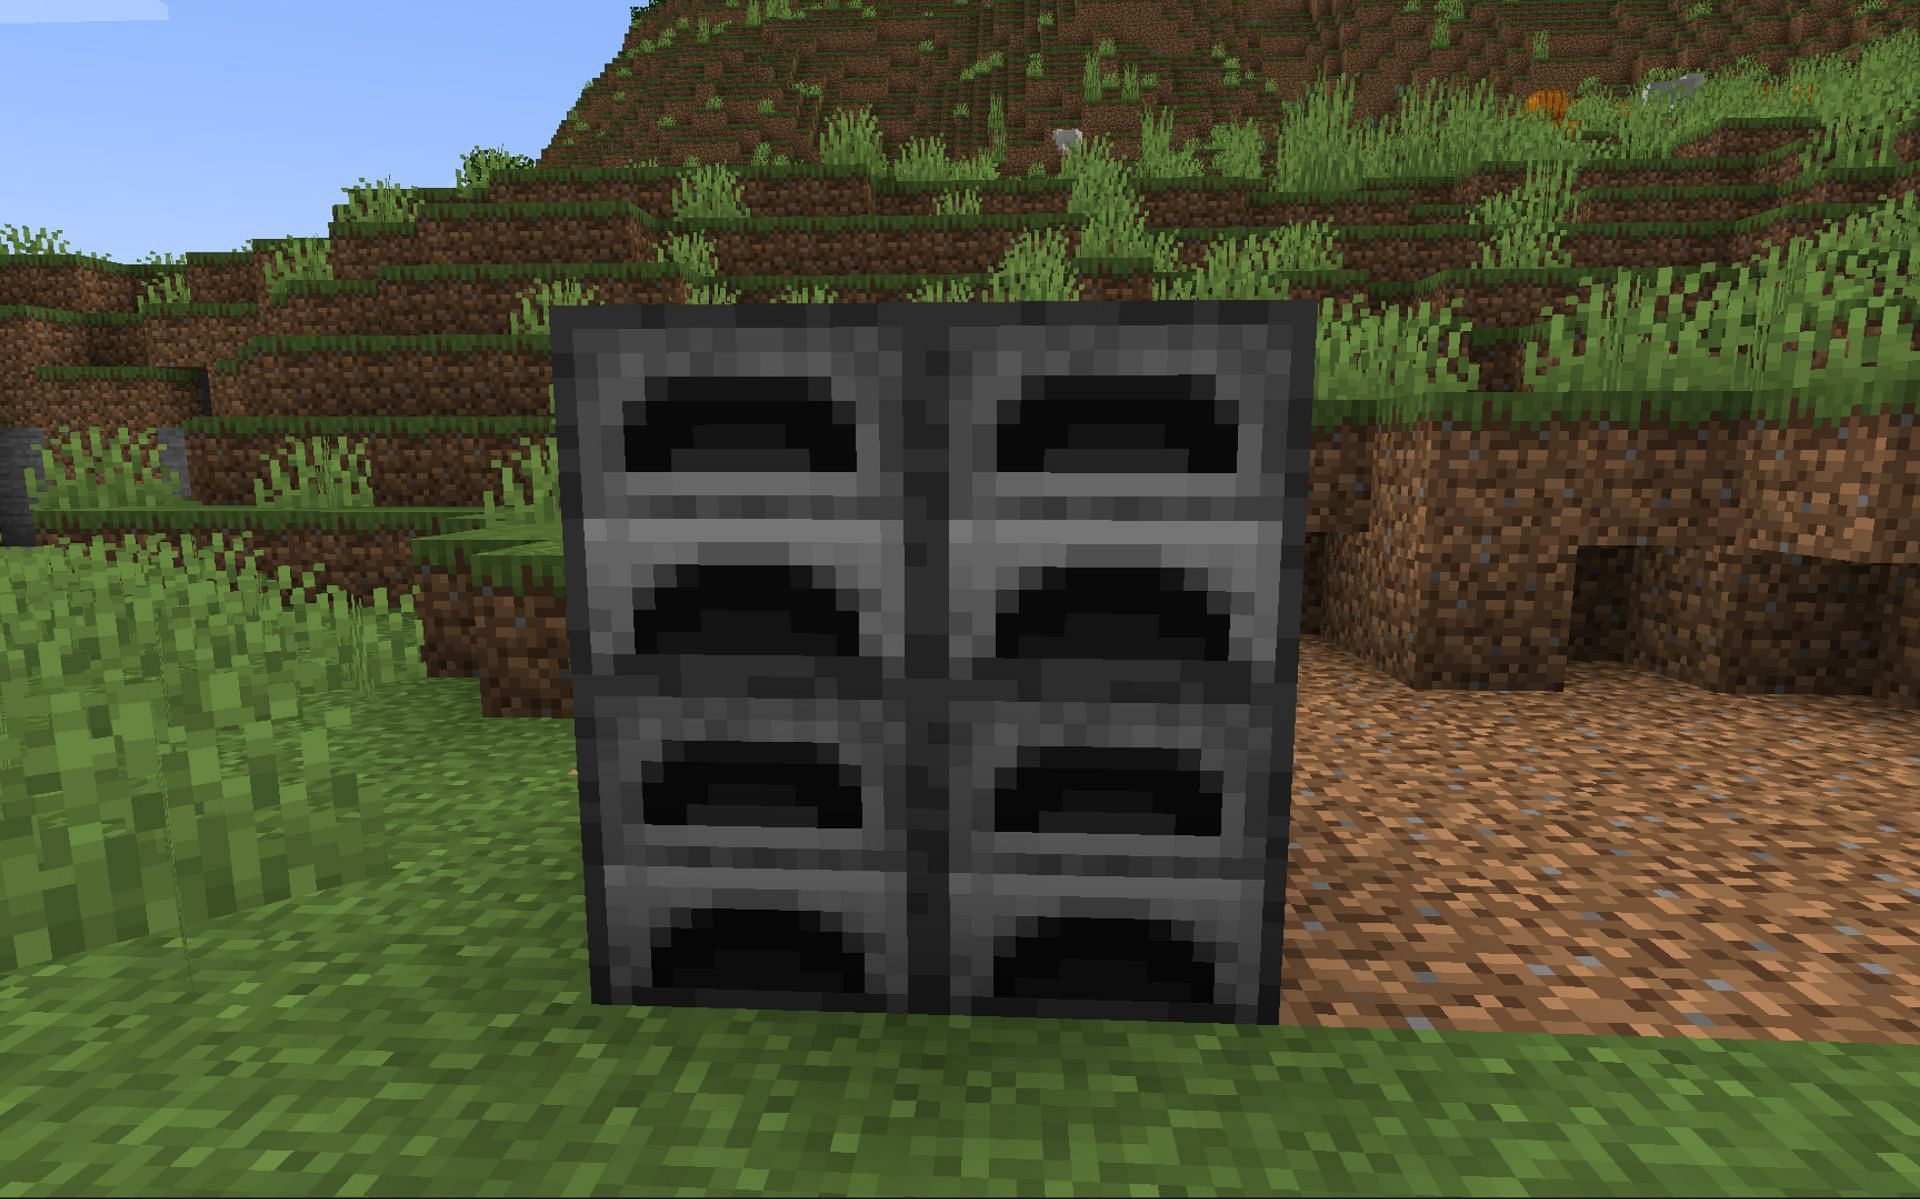 Four regular furnaces stacked on top of each other (Image via Minecraft)